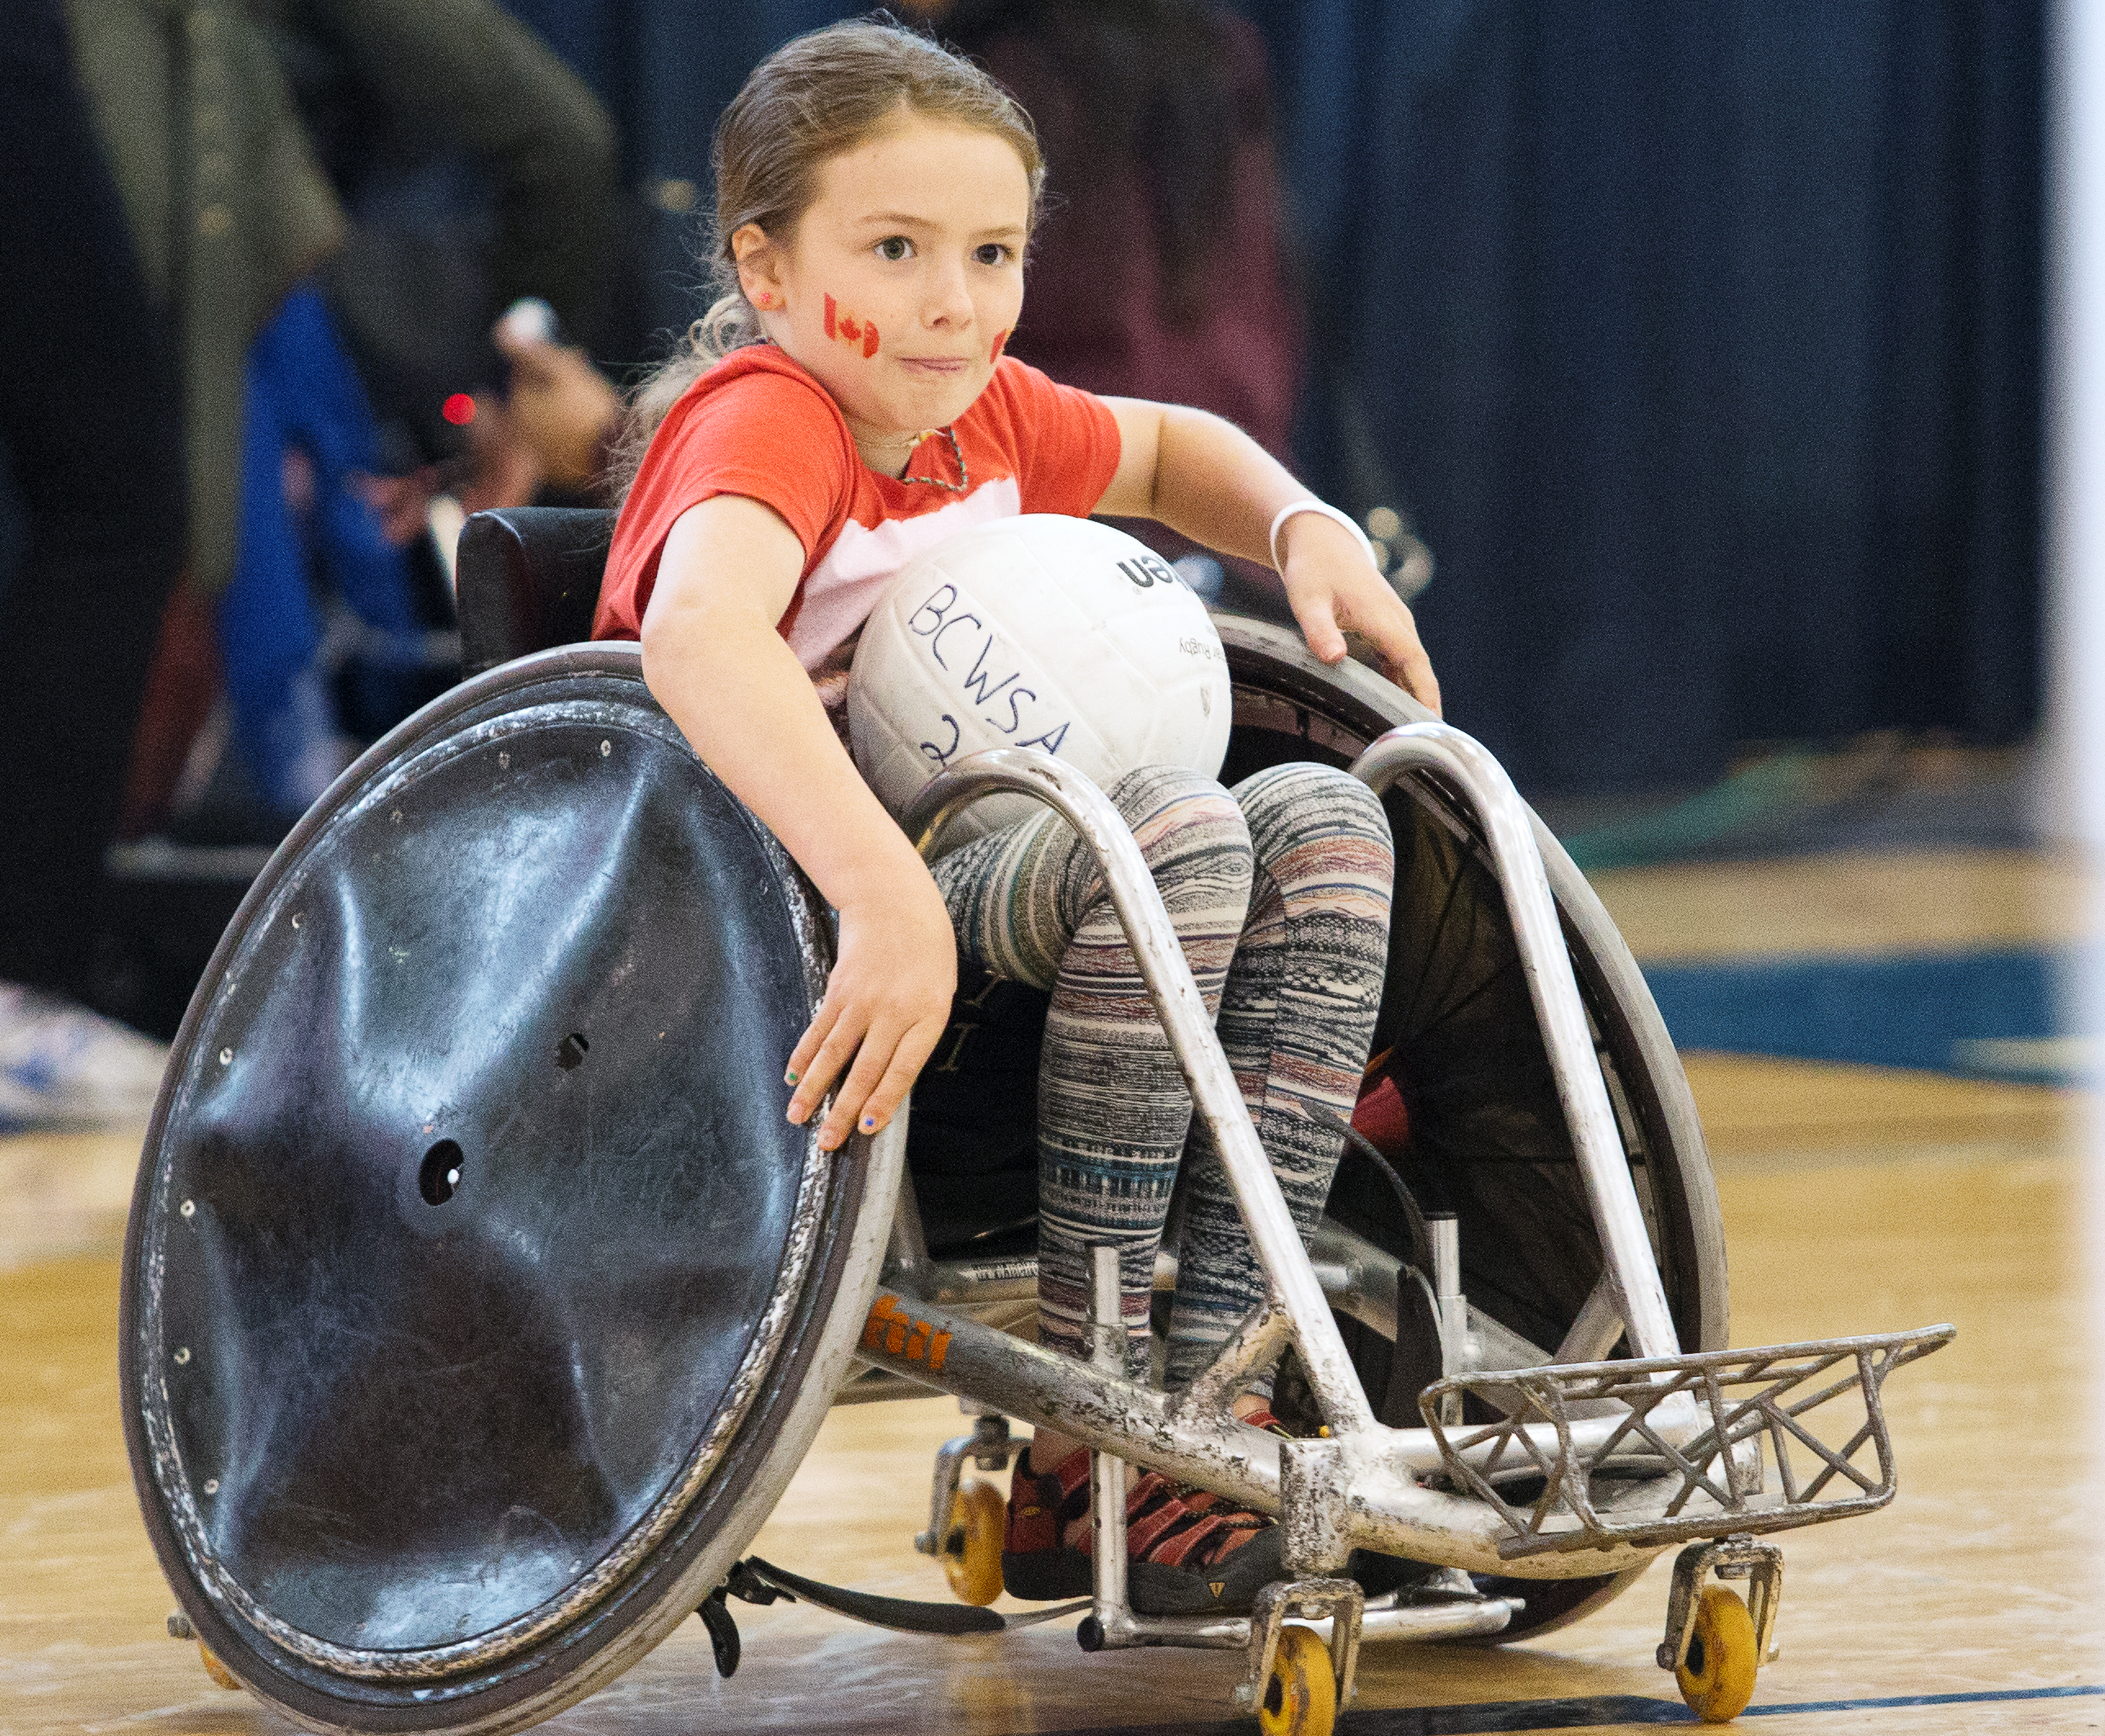 young happy and smiling girl playing wheelchair rugby